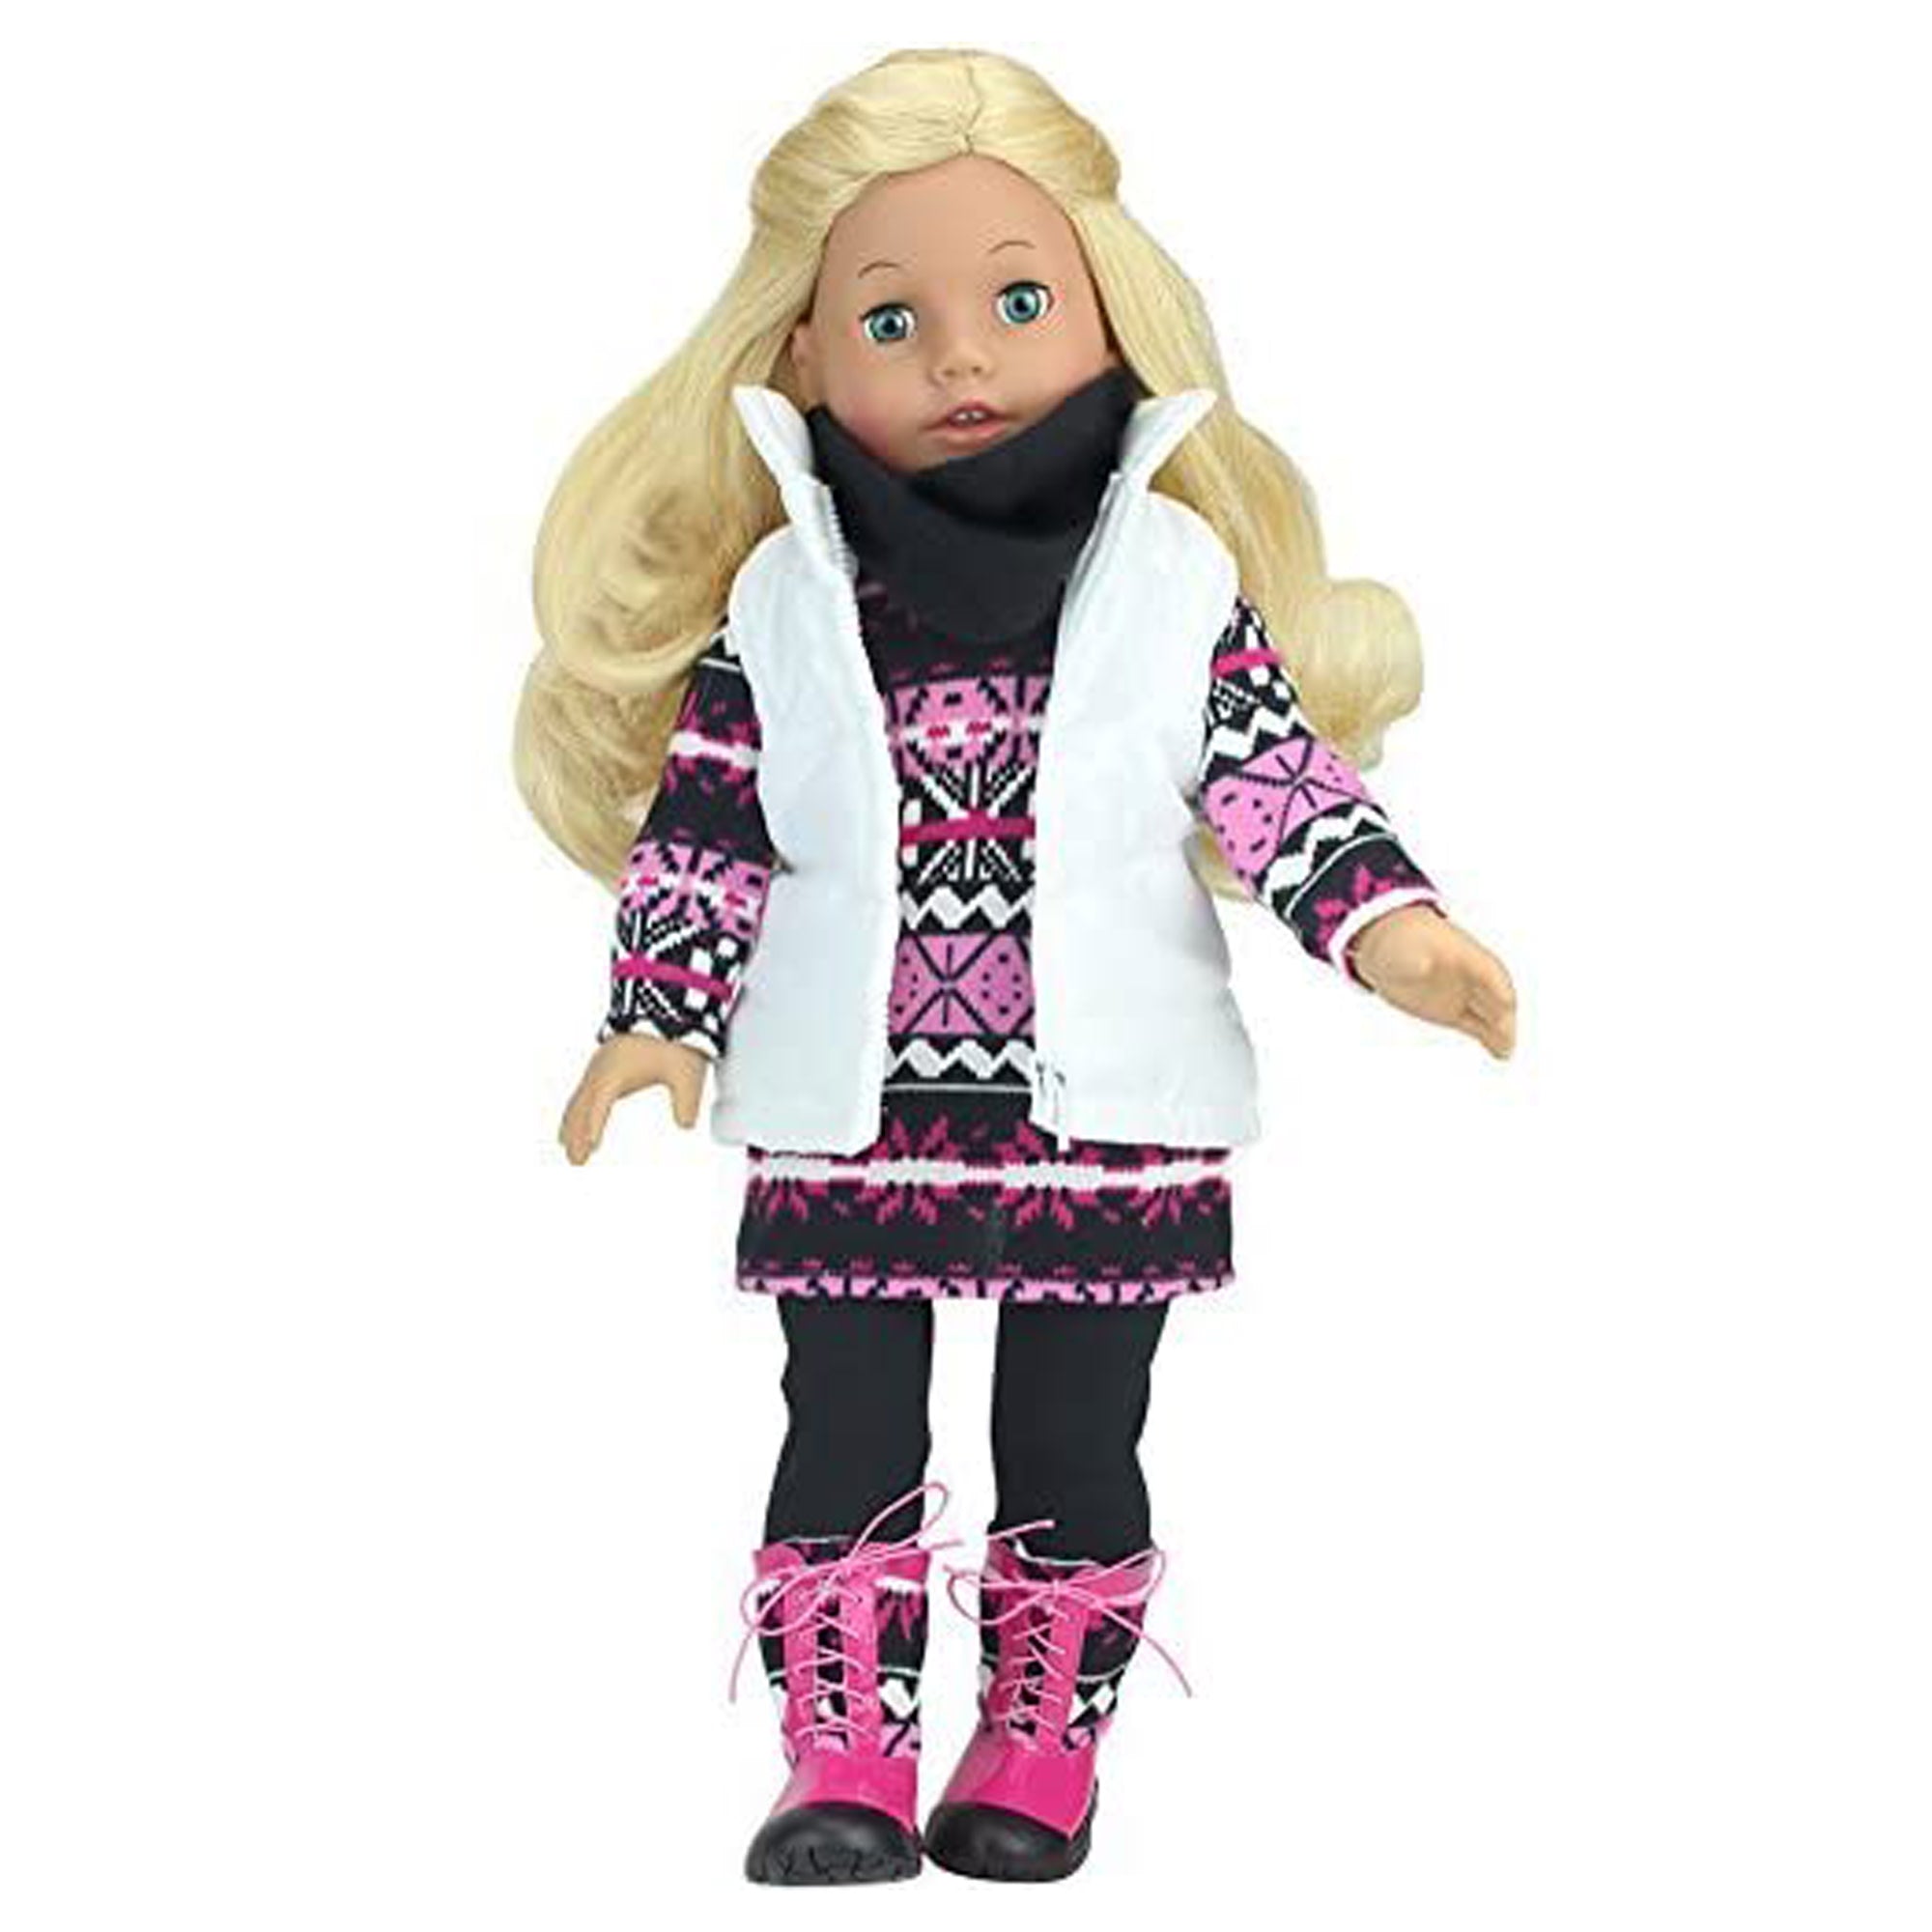  Sophia's Winter Outfit 4 Piece Set with Knit Print Sweater,  Black Leggings, White Quilted Vest, and Blue and Black Print Winter Boots  for 18 Dolls, Blue : Toys & Games